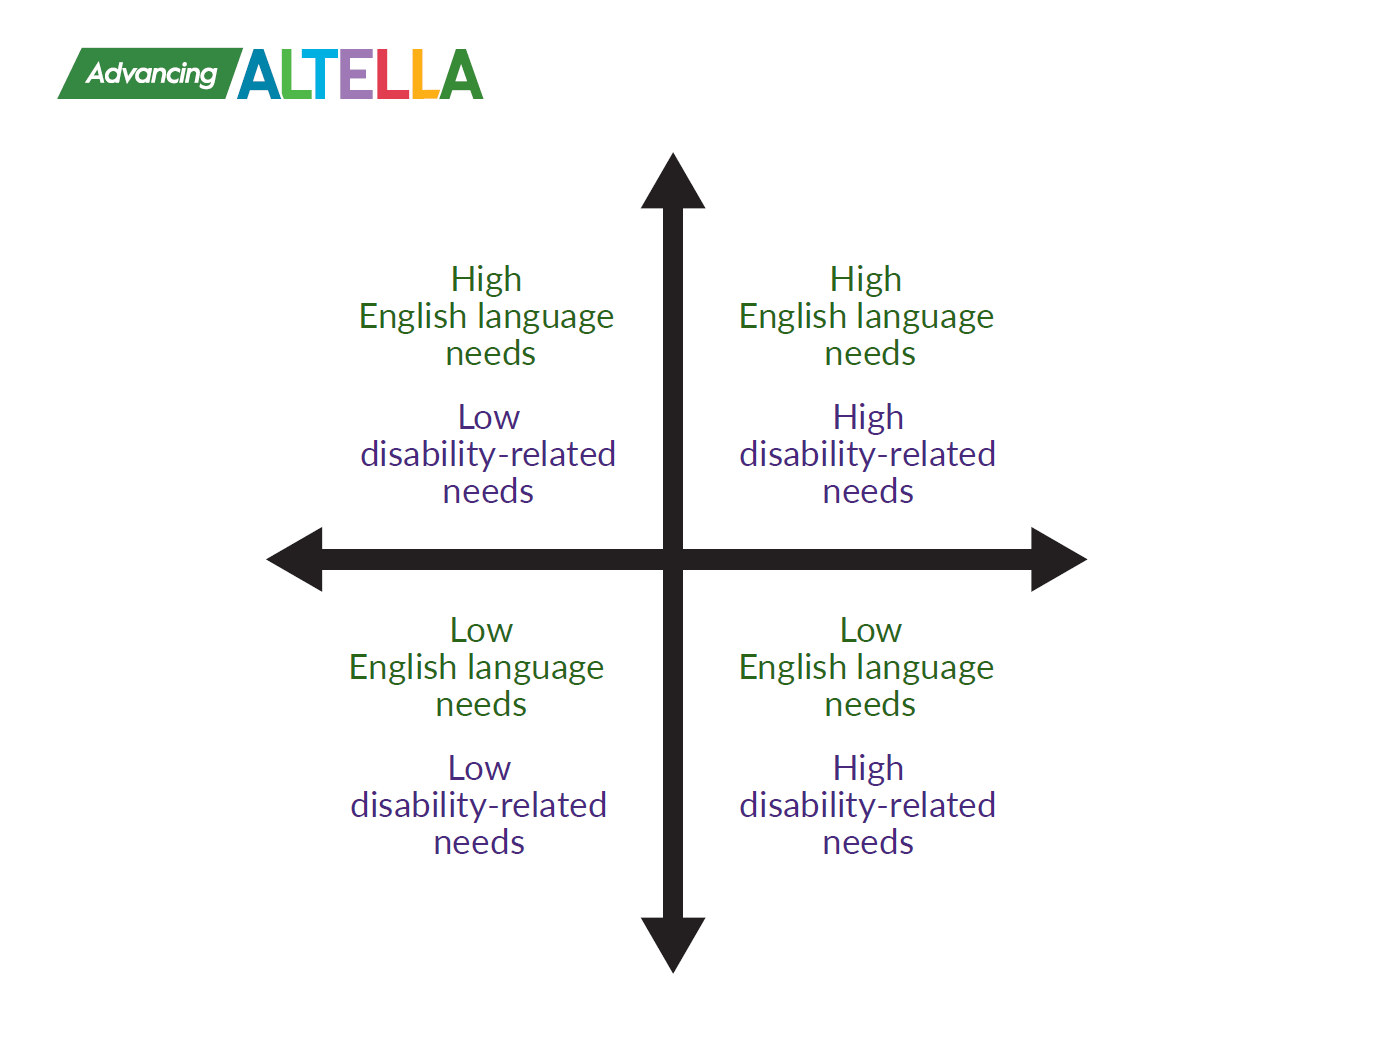 Advancing ALTELLA Framework featuring four quadrants separated by black arrows. Each quadrant represents a different language and disability need.